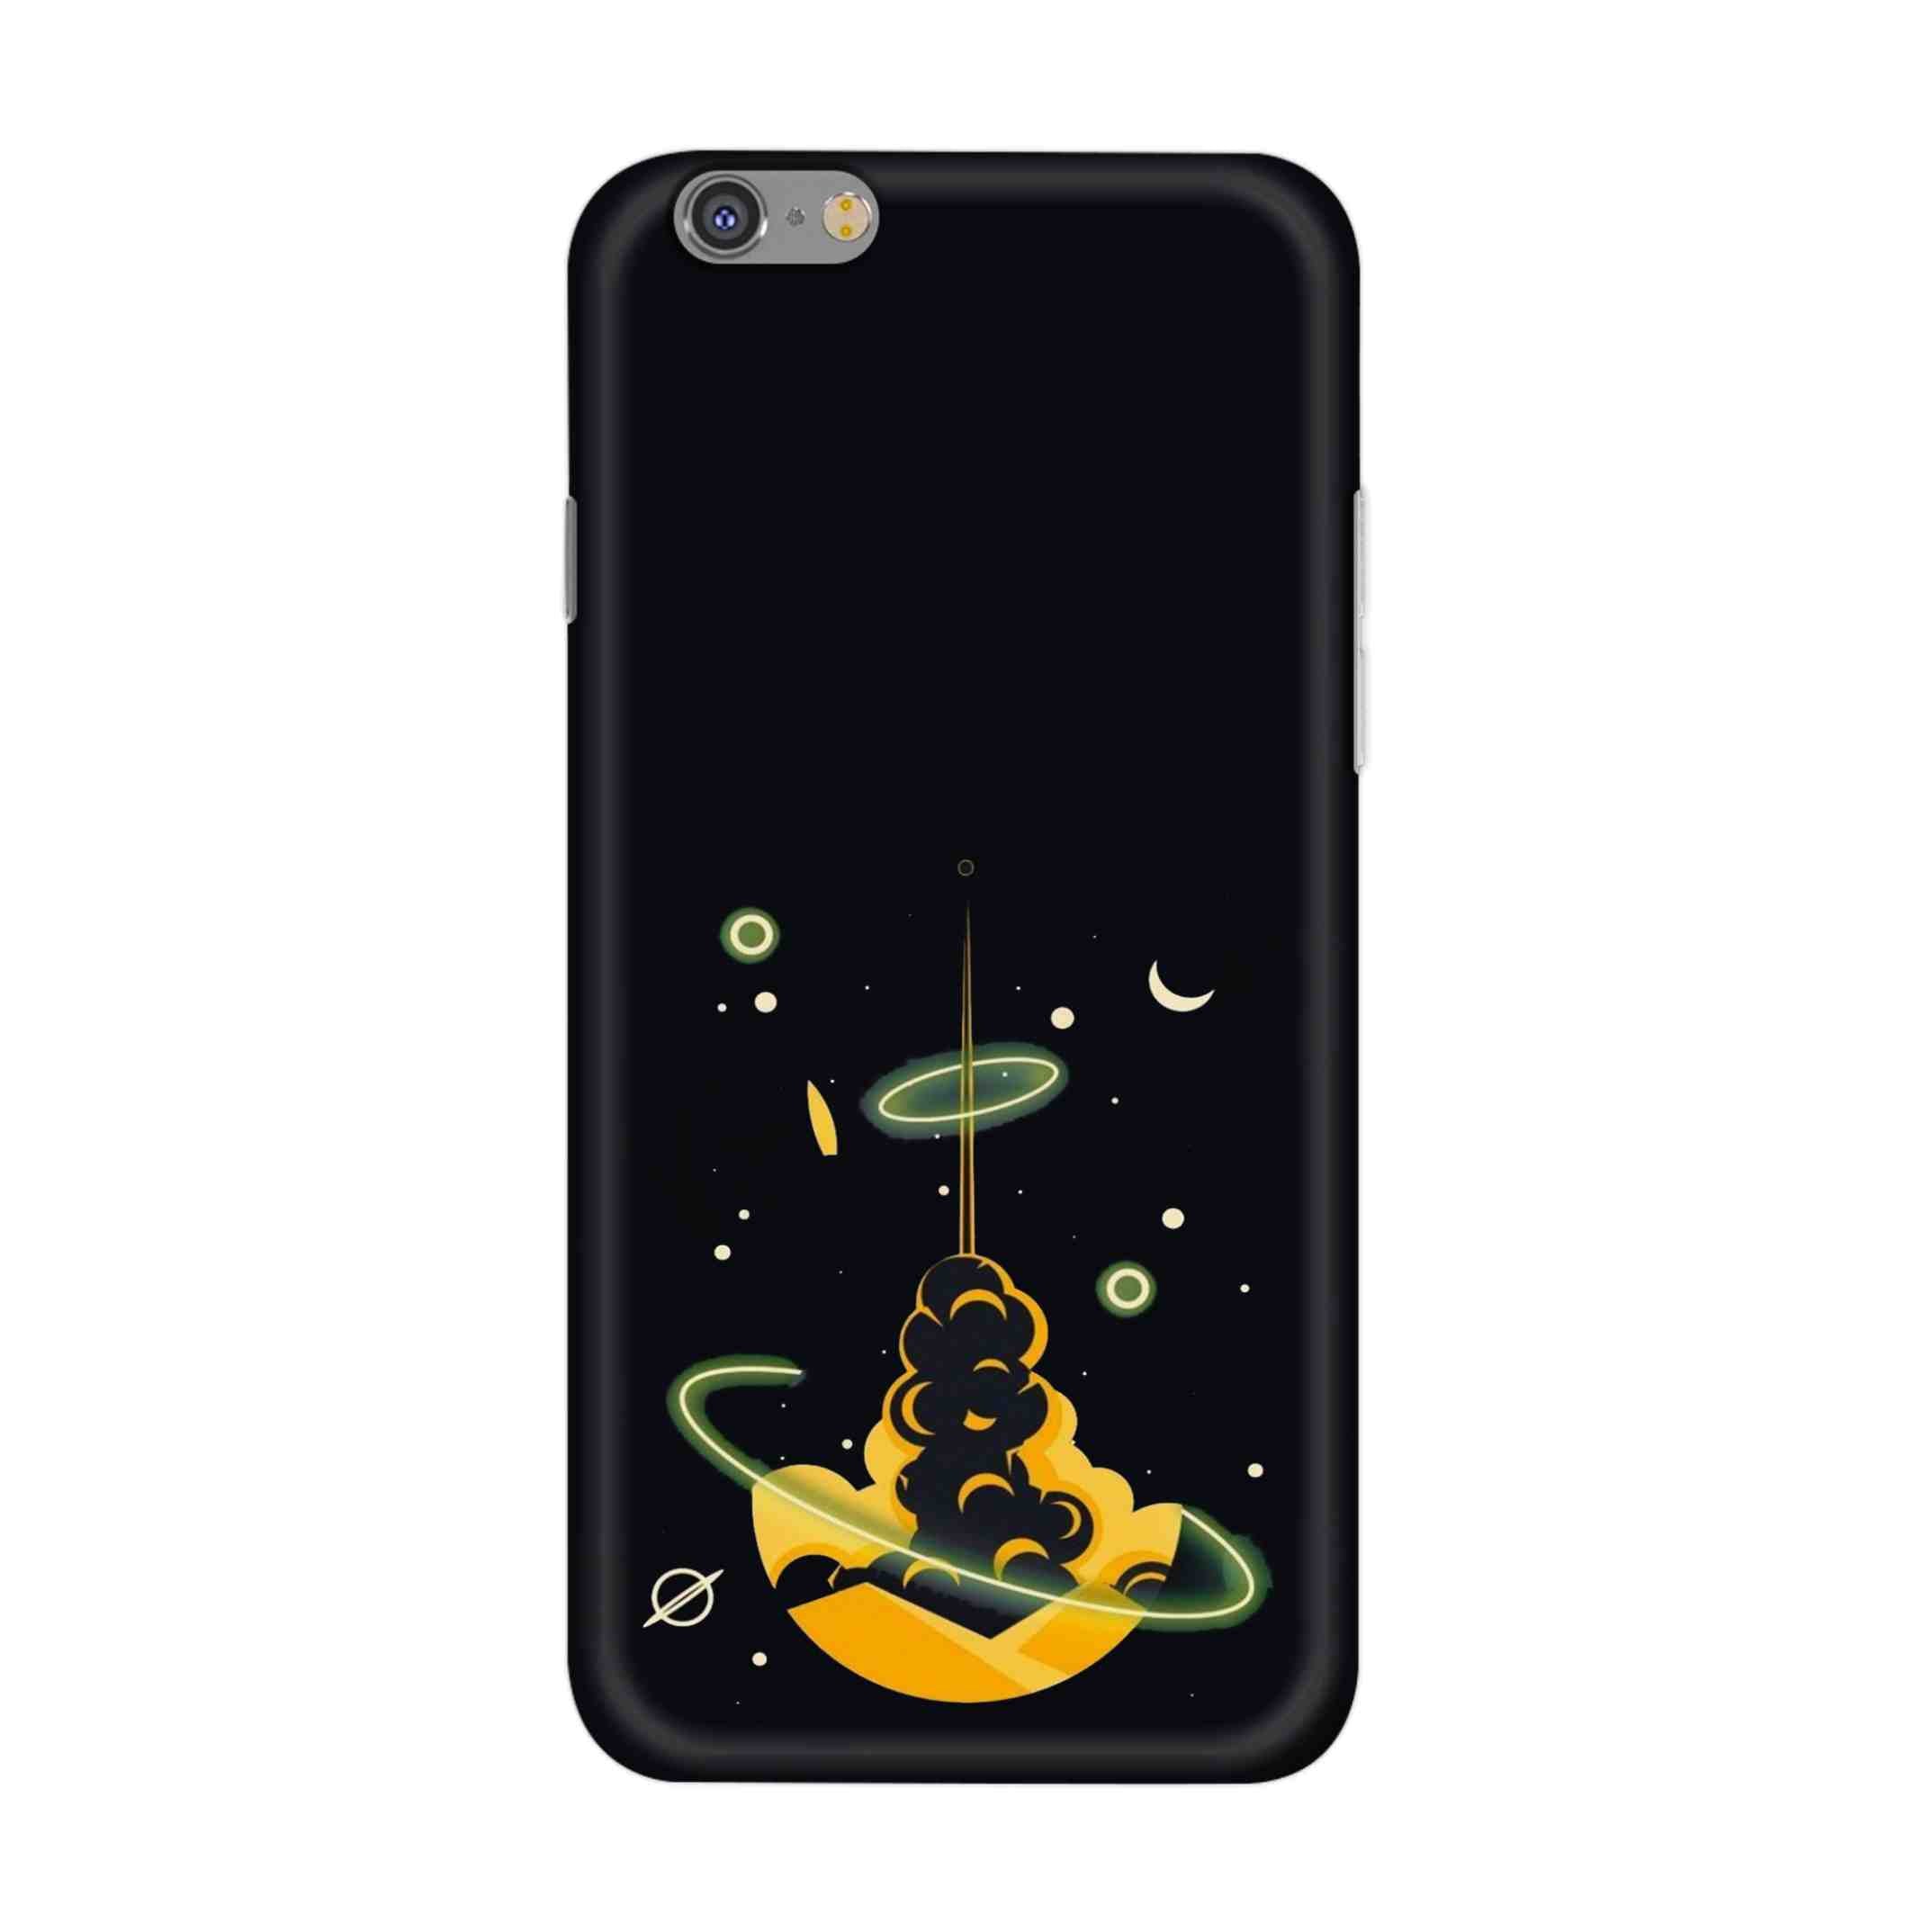 Buy Moon Hard Back Mobile Phone Case/Cover For iPhone 6 Plus / 6s Plus Online